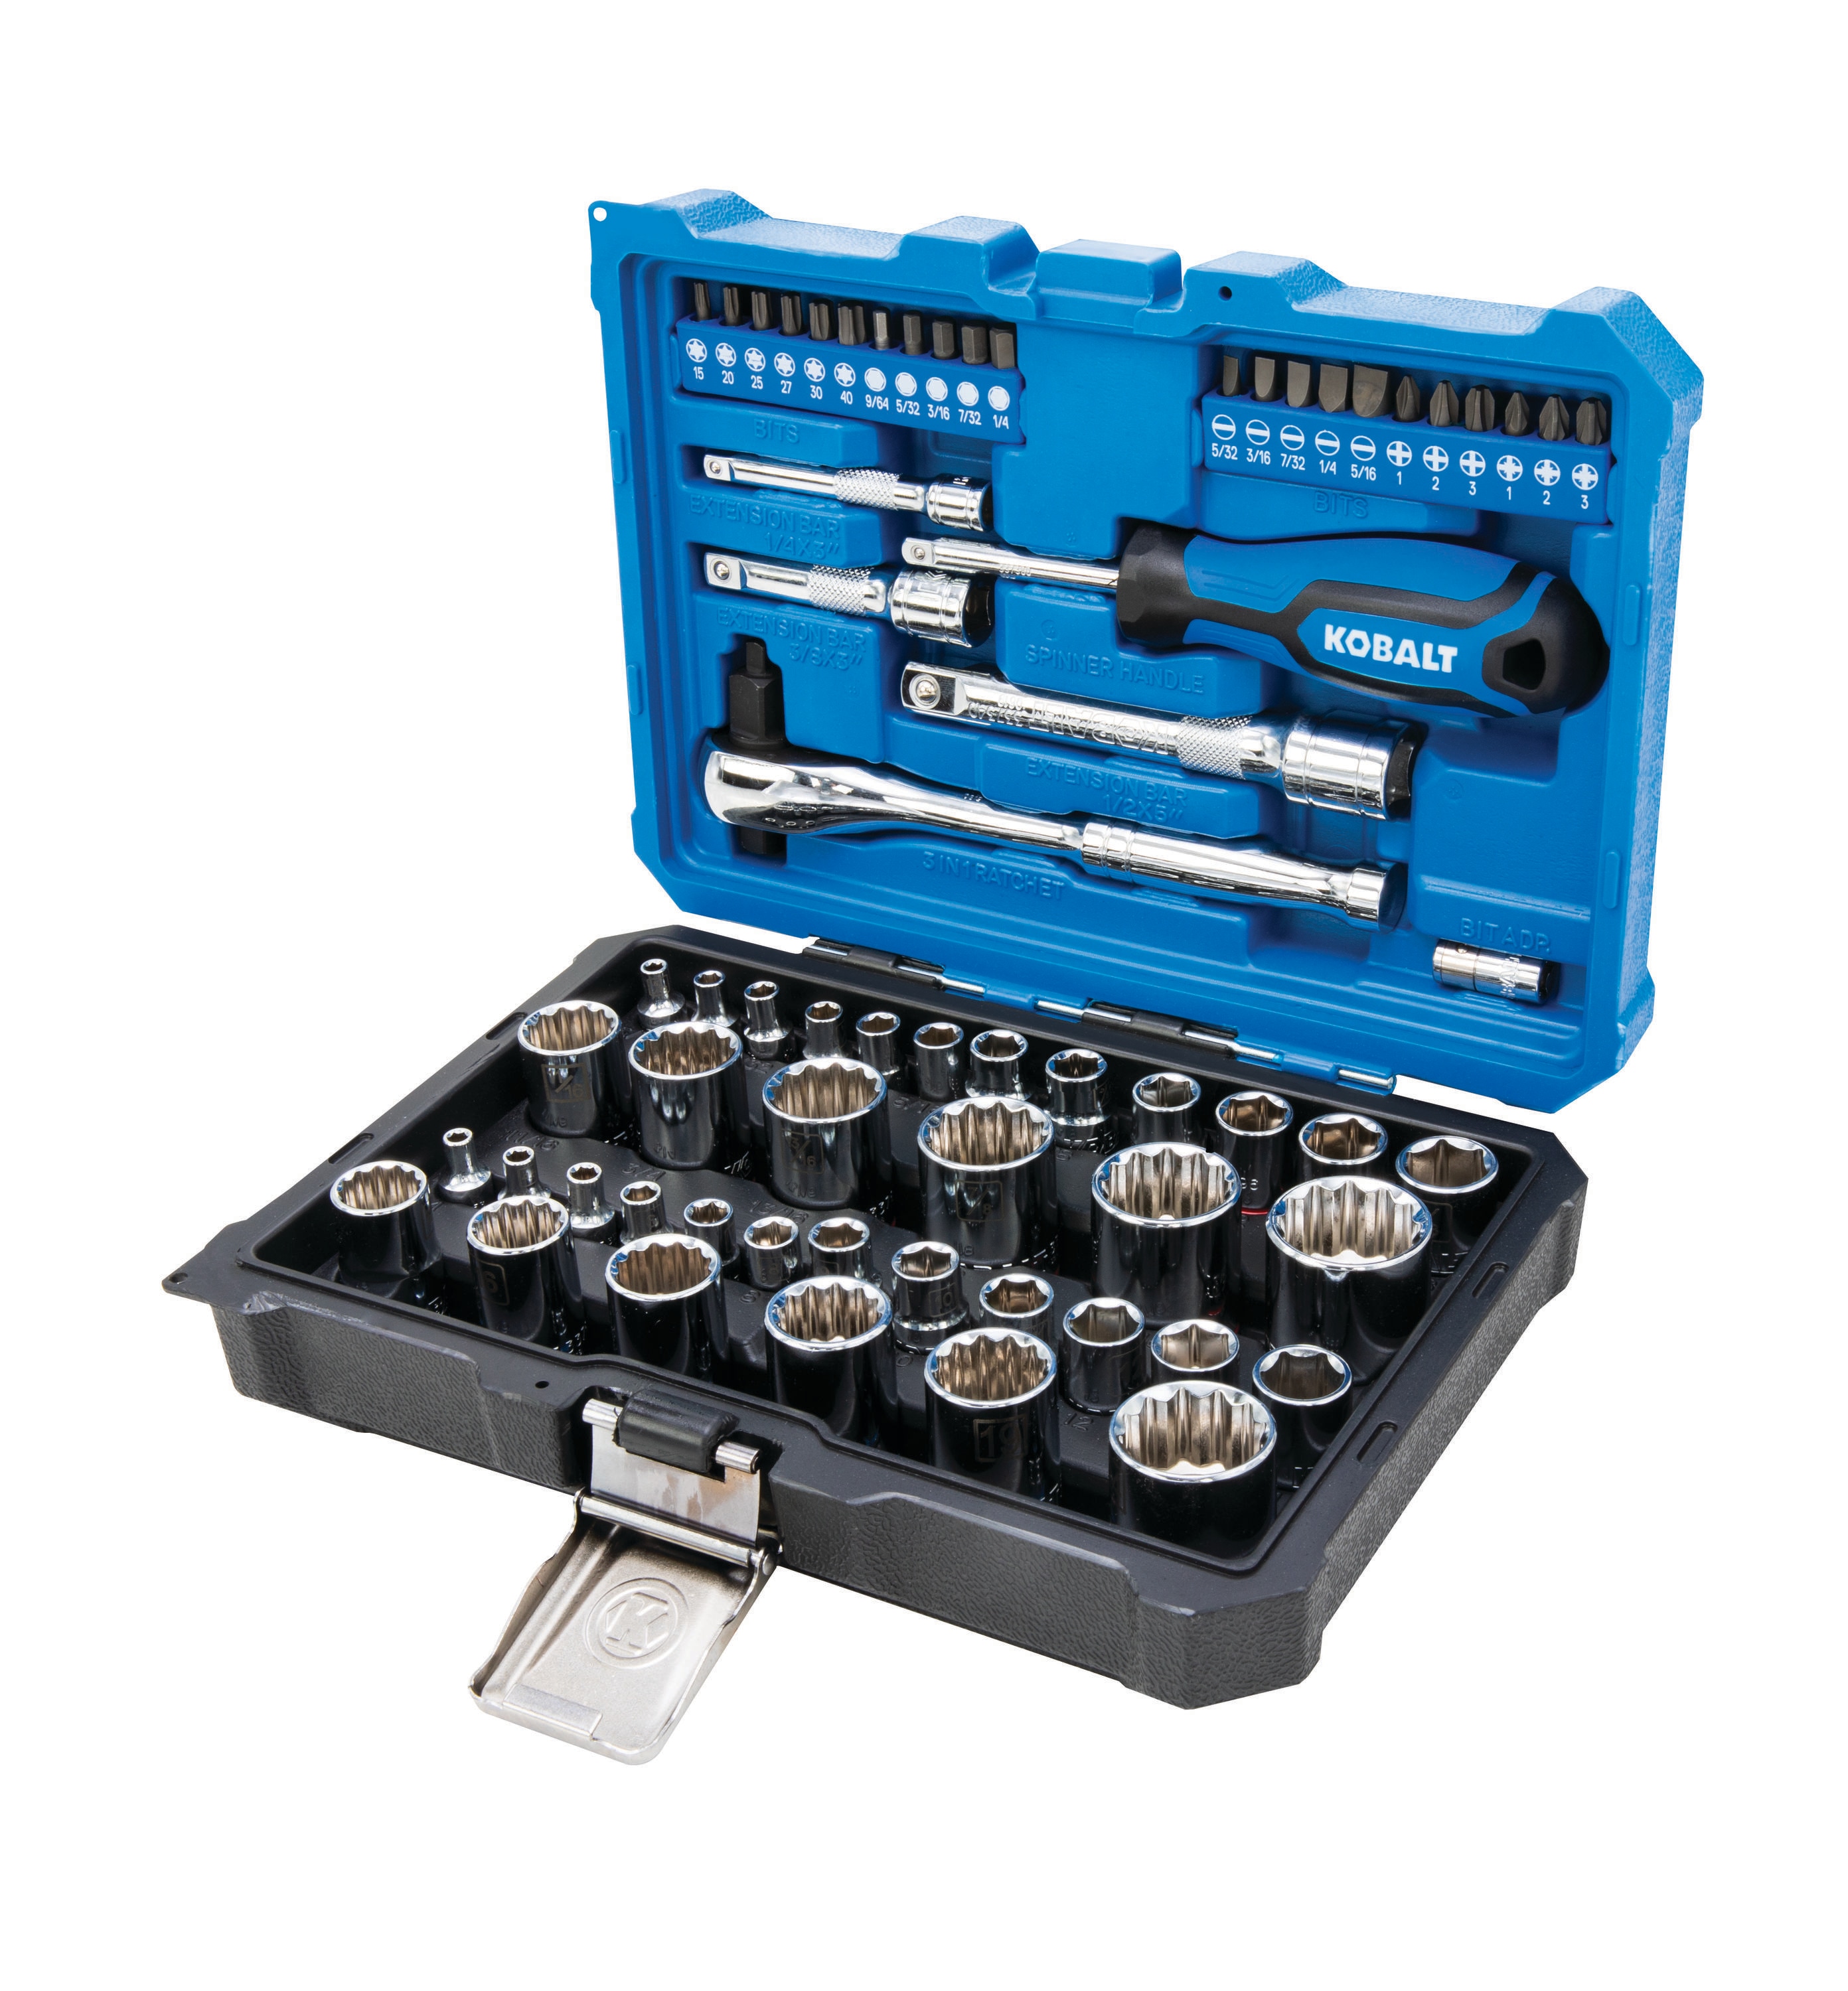  Yoption 27 Pieces Leather Stamping Tool Set, 26